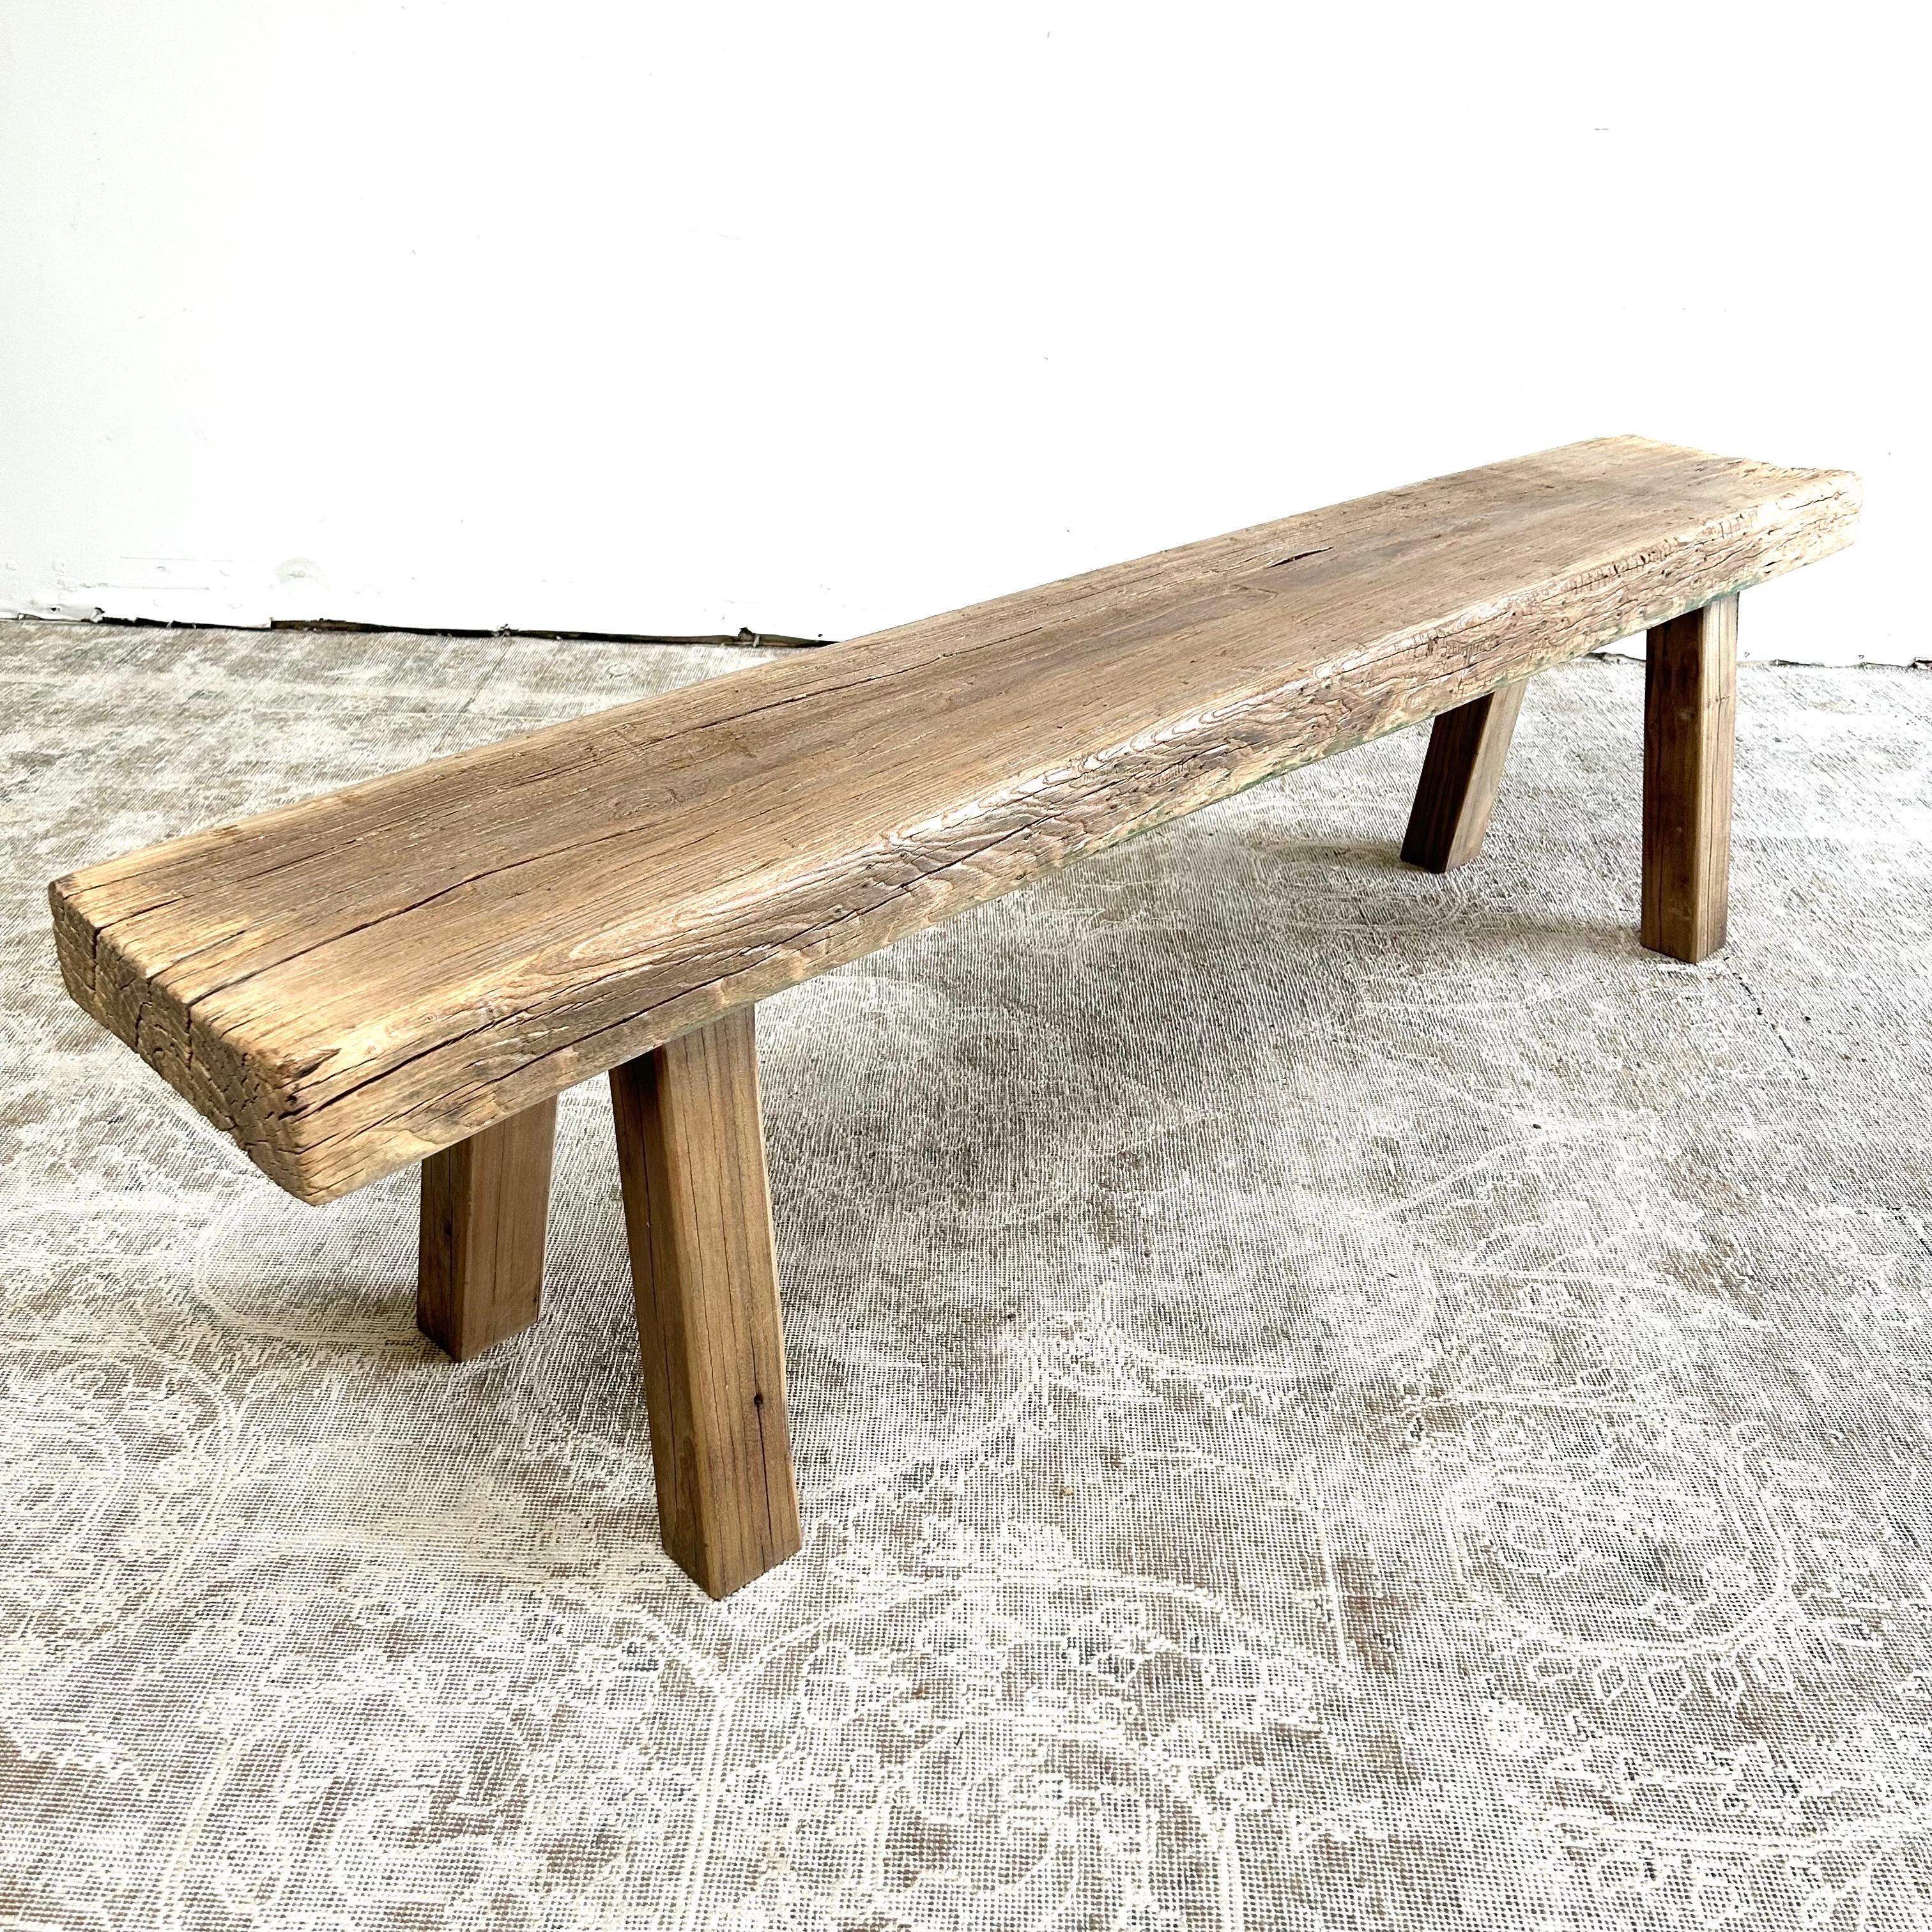 Vintage antique elm wood bench. These are the real vintage antique elm wood benches! Beautiful antique patina, with weathering and age, these are solid and sturdy ready for daily use, use as as a table behind a sofa, stool, coffee table, they are